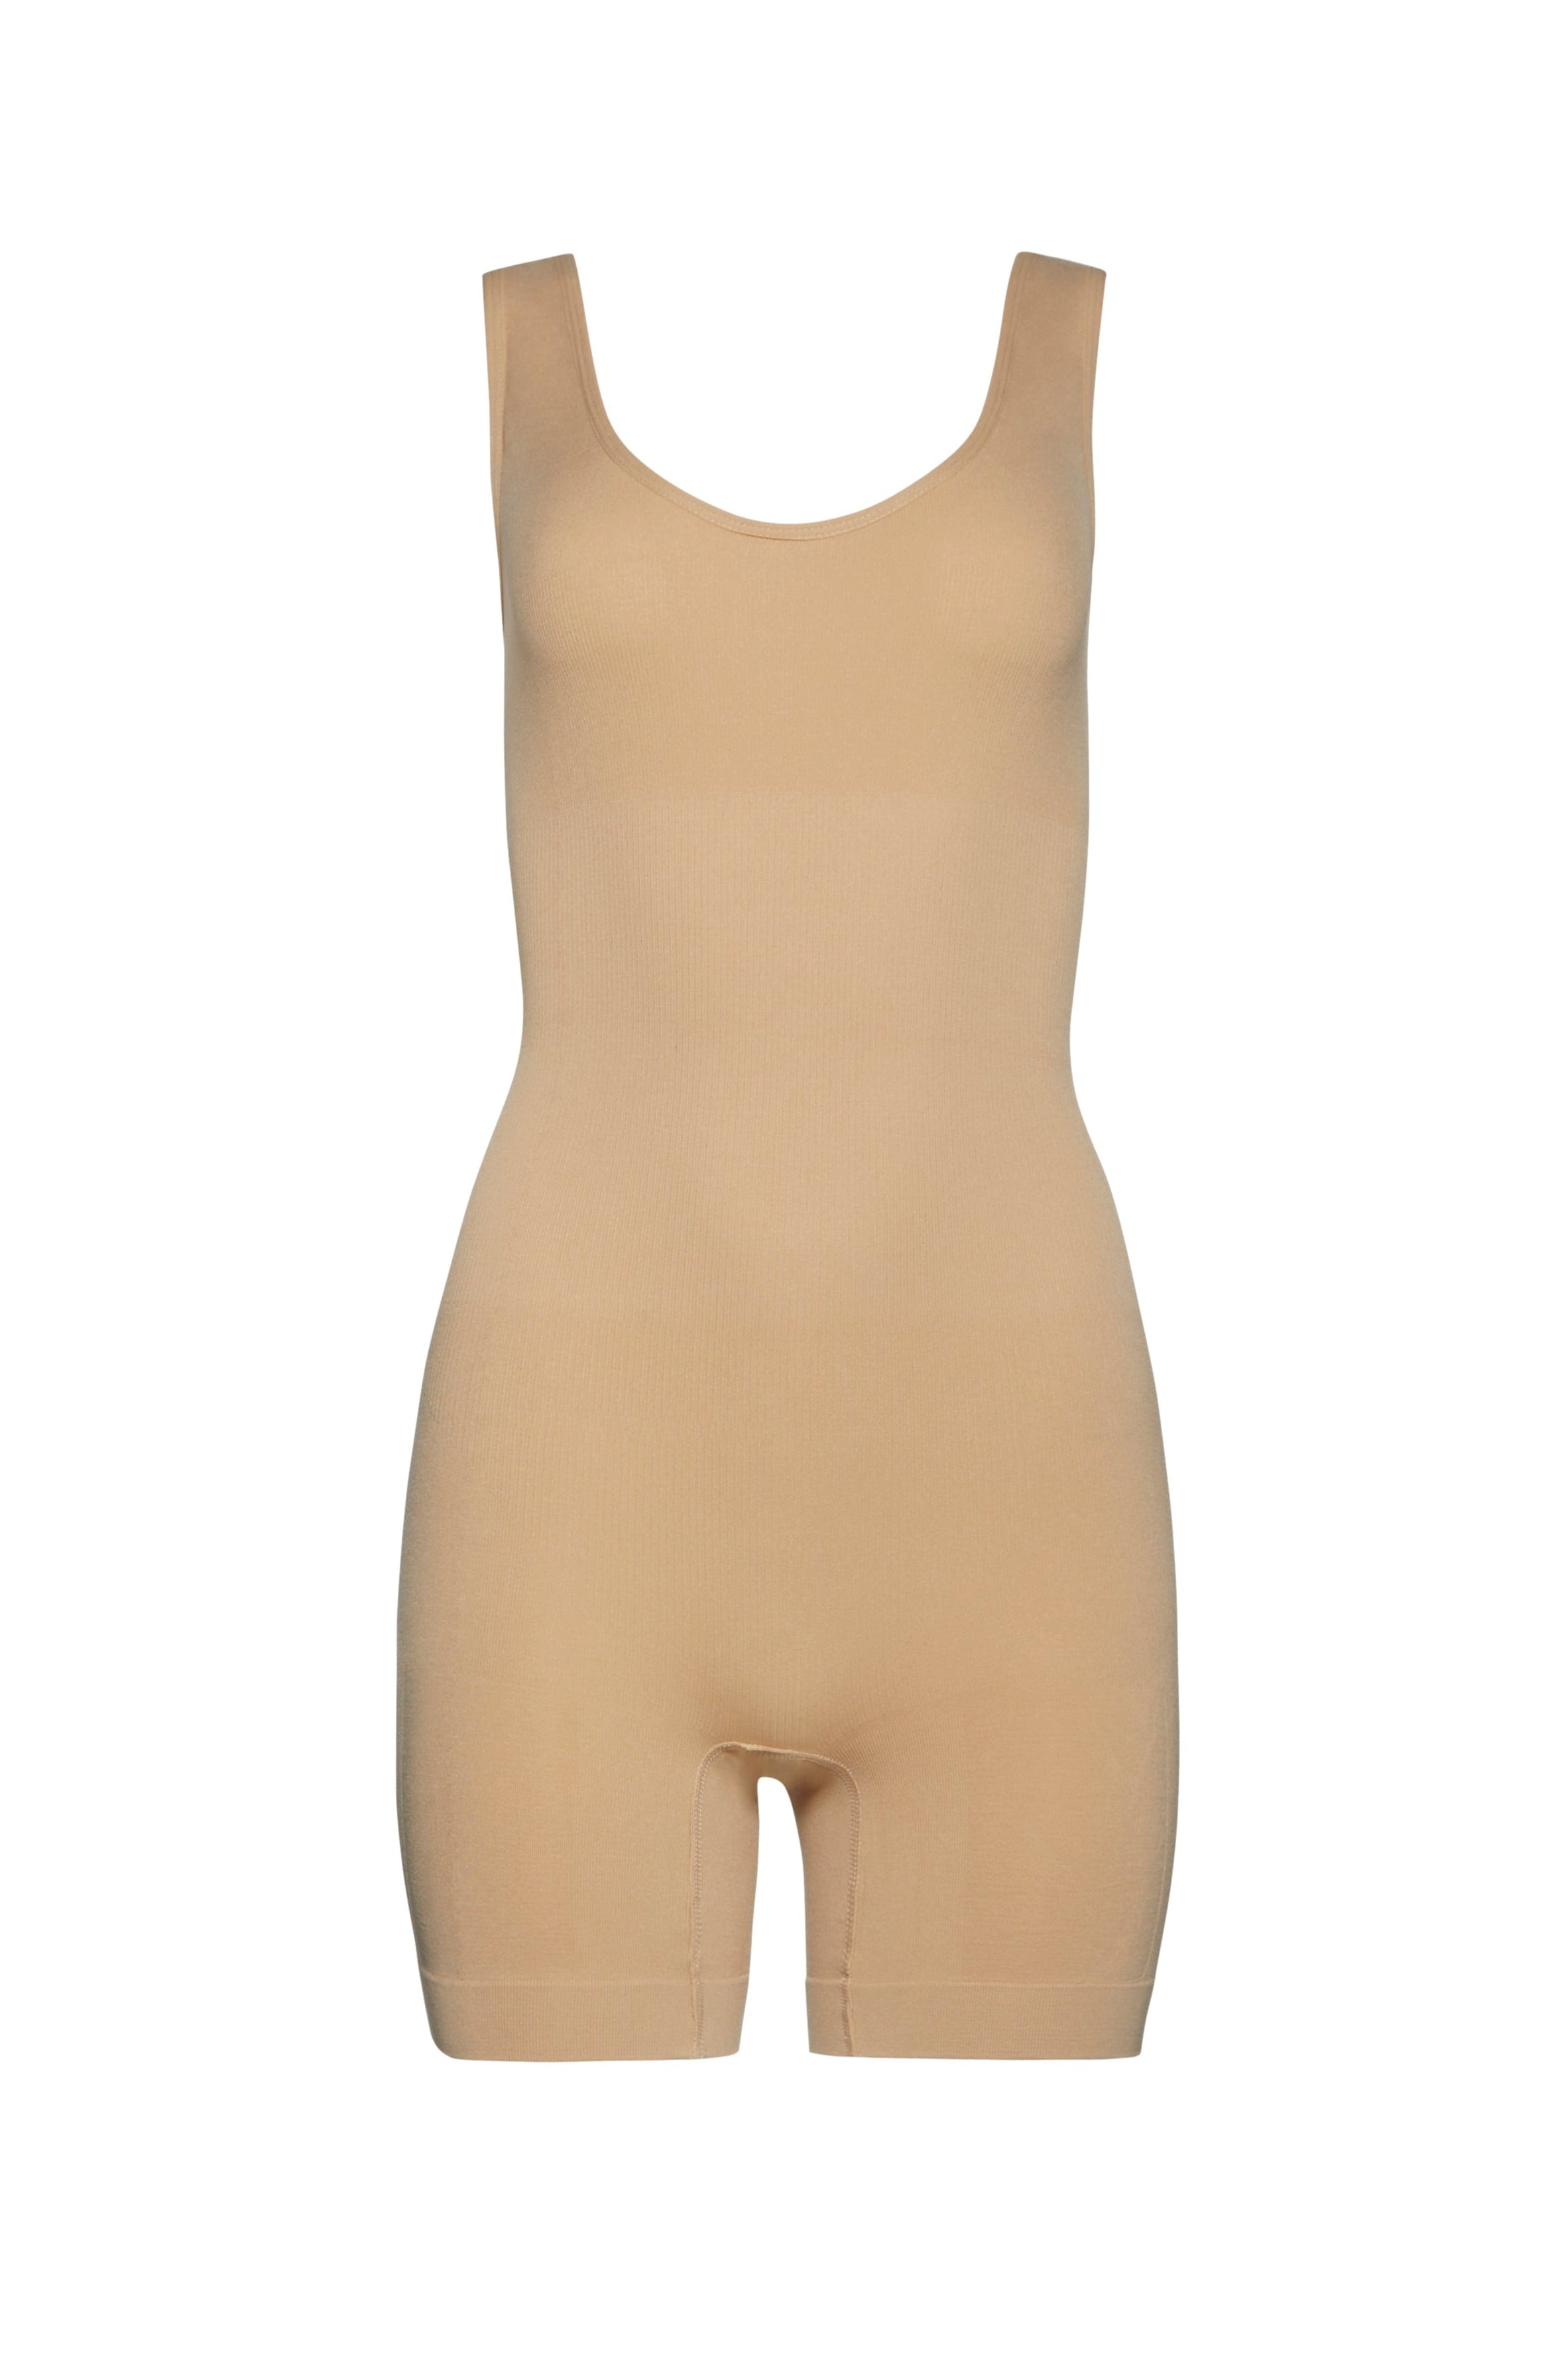 The Support Bodysuit